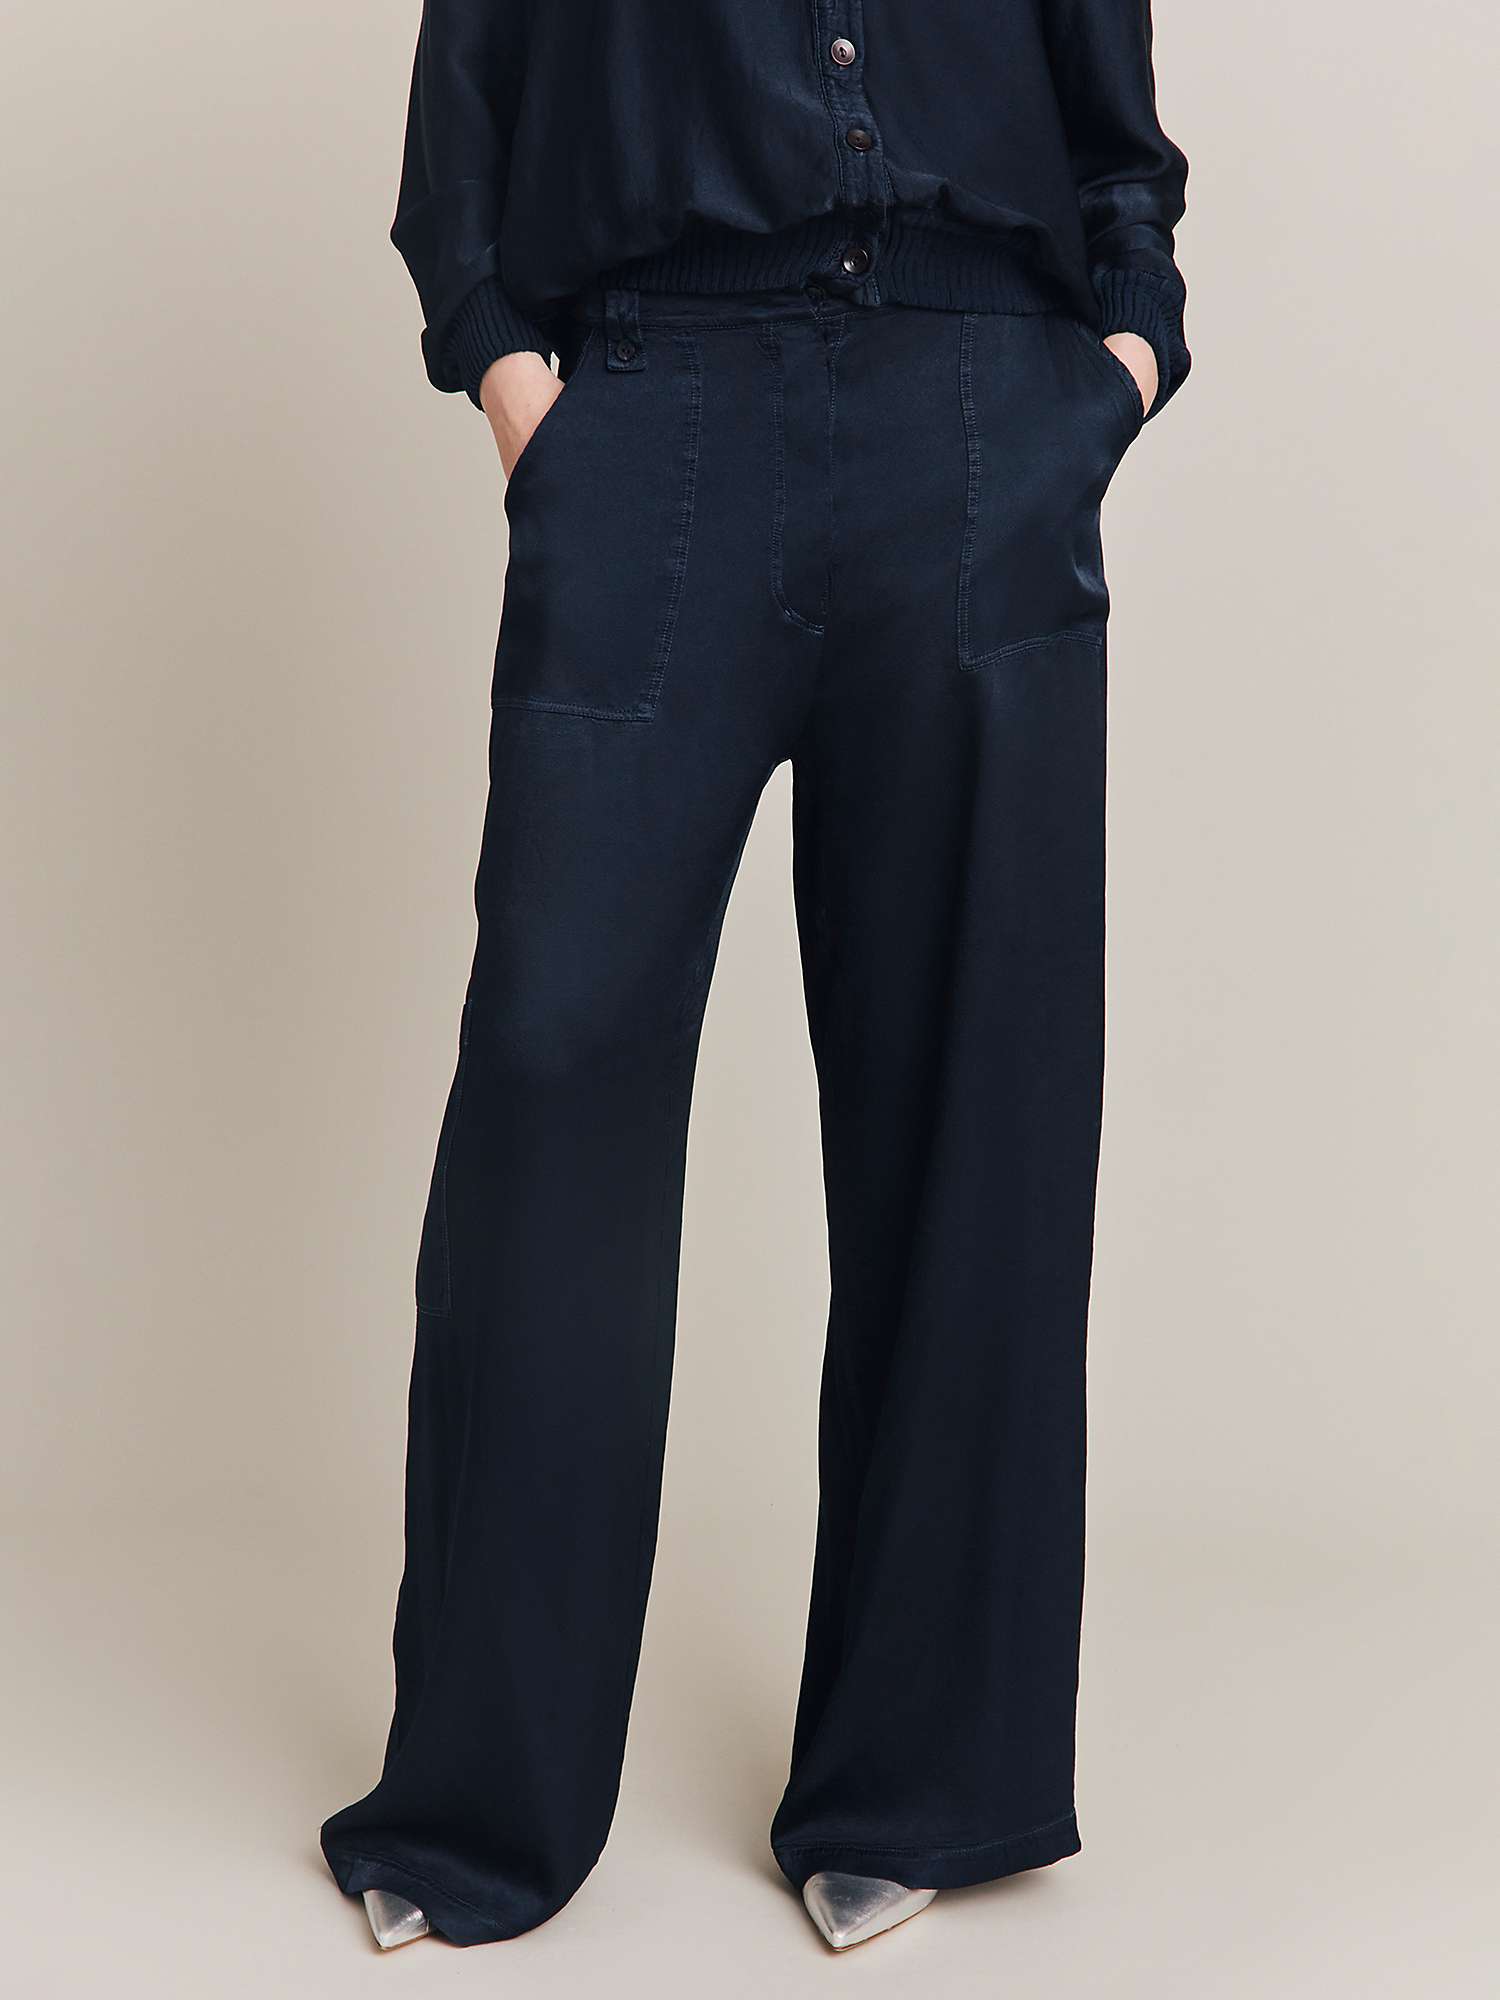 Buy Ghost Aurora Cargo Style Satin Trousers Online at johnlewis.com